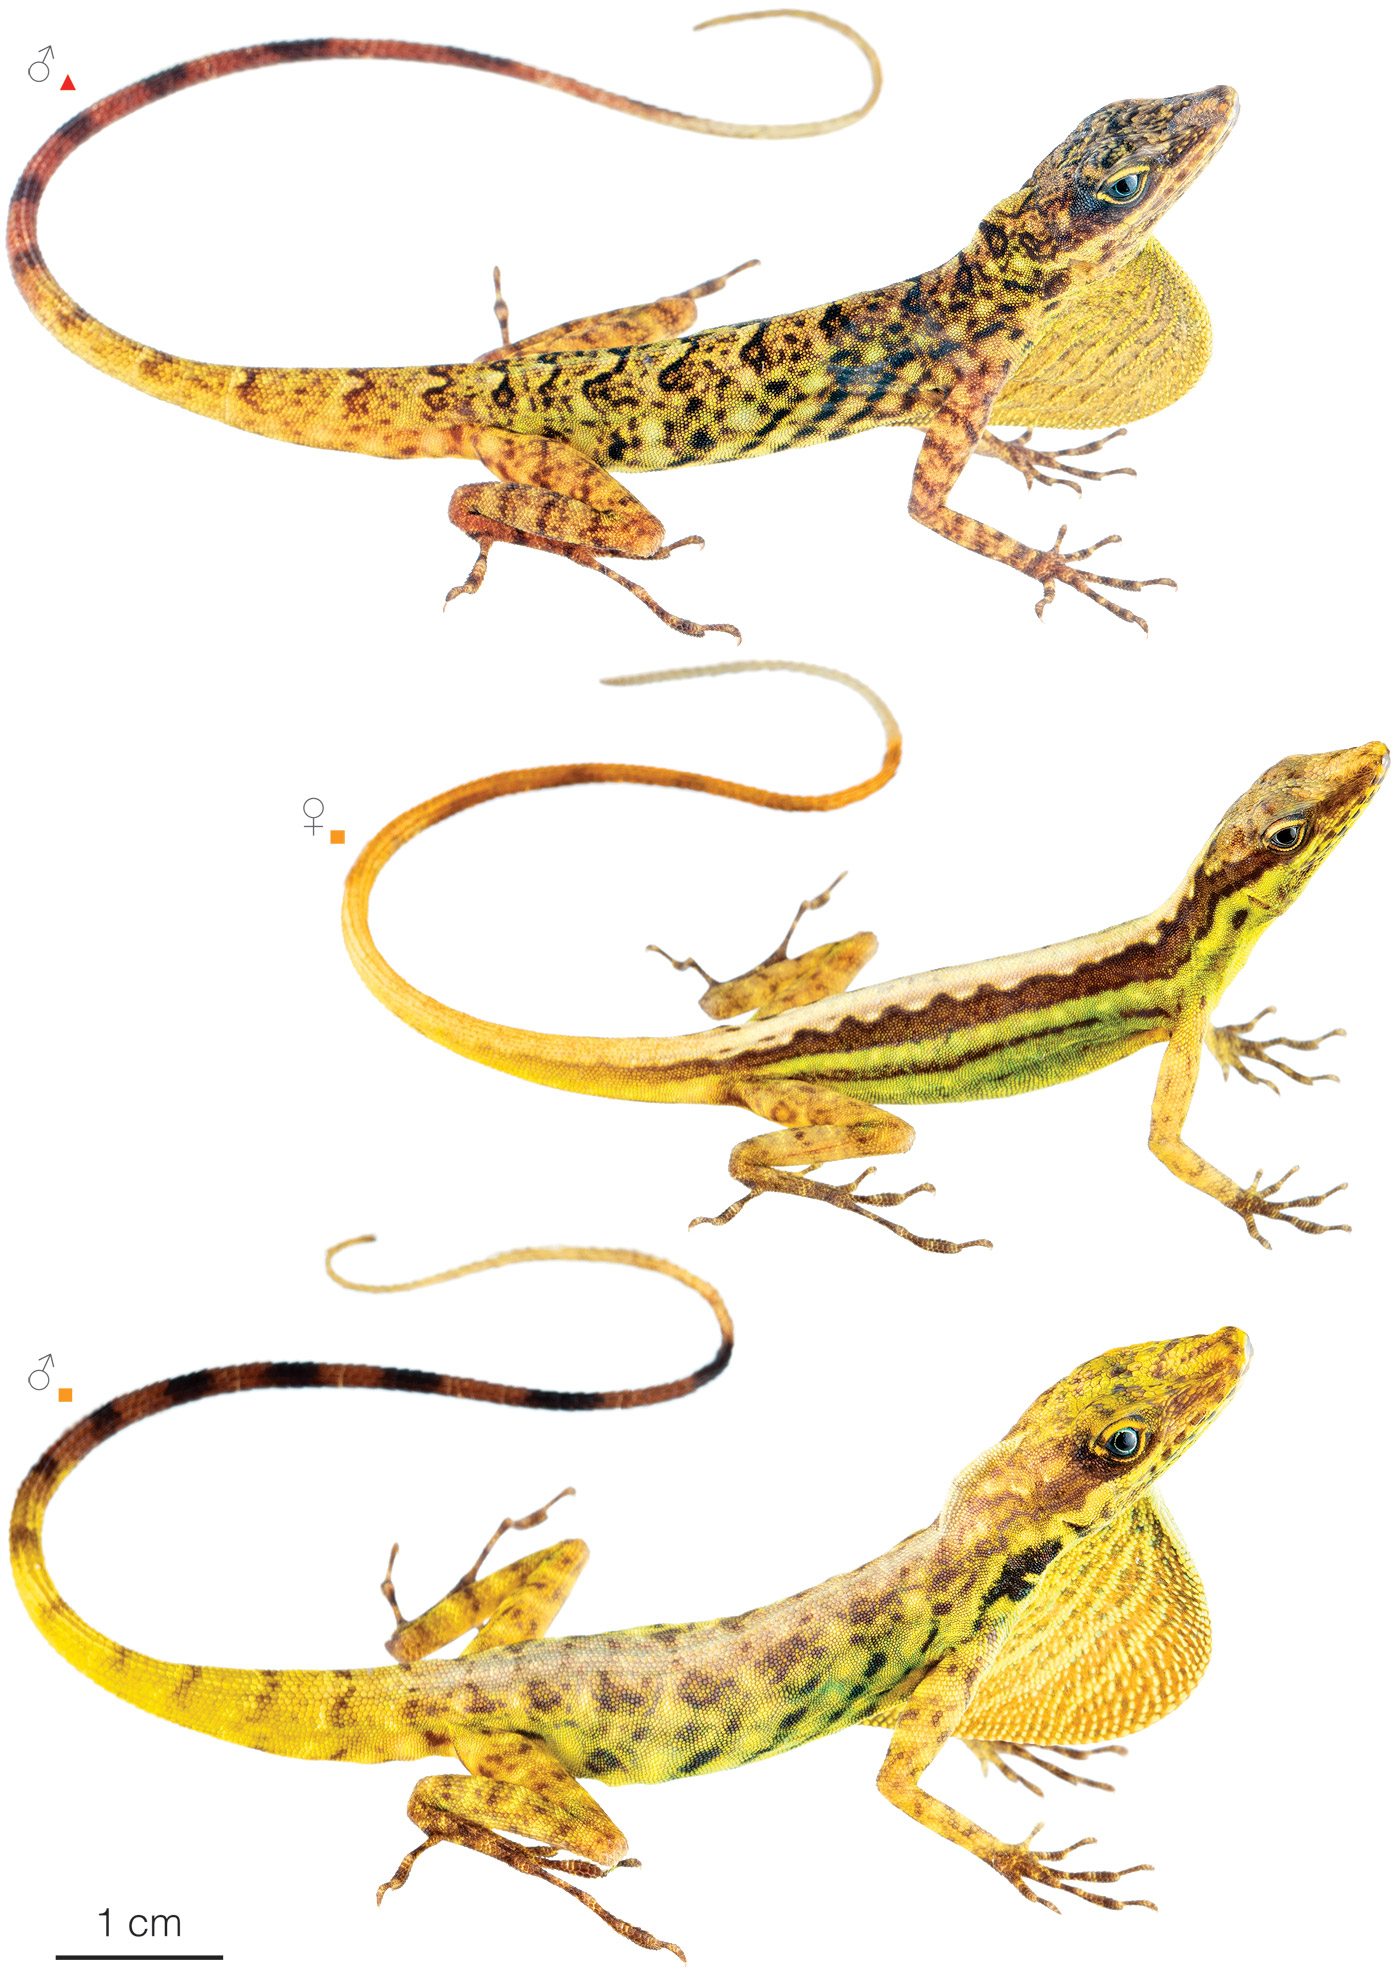 Figure showing variation among individuals of Anolis anchicayae